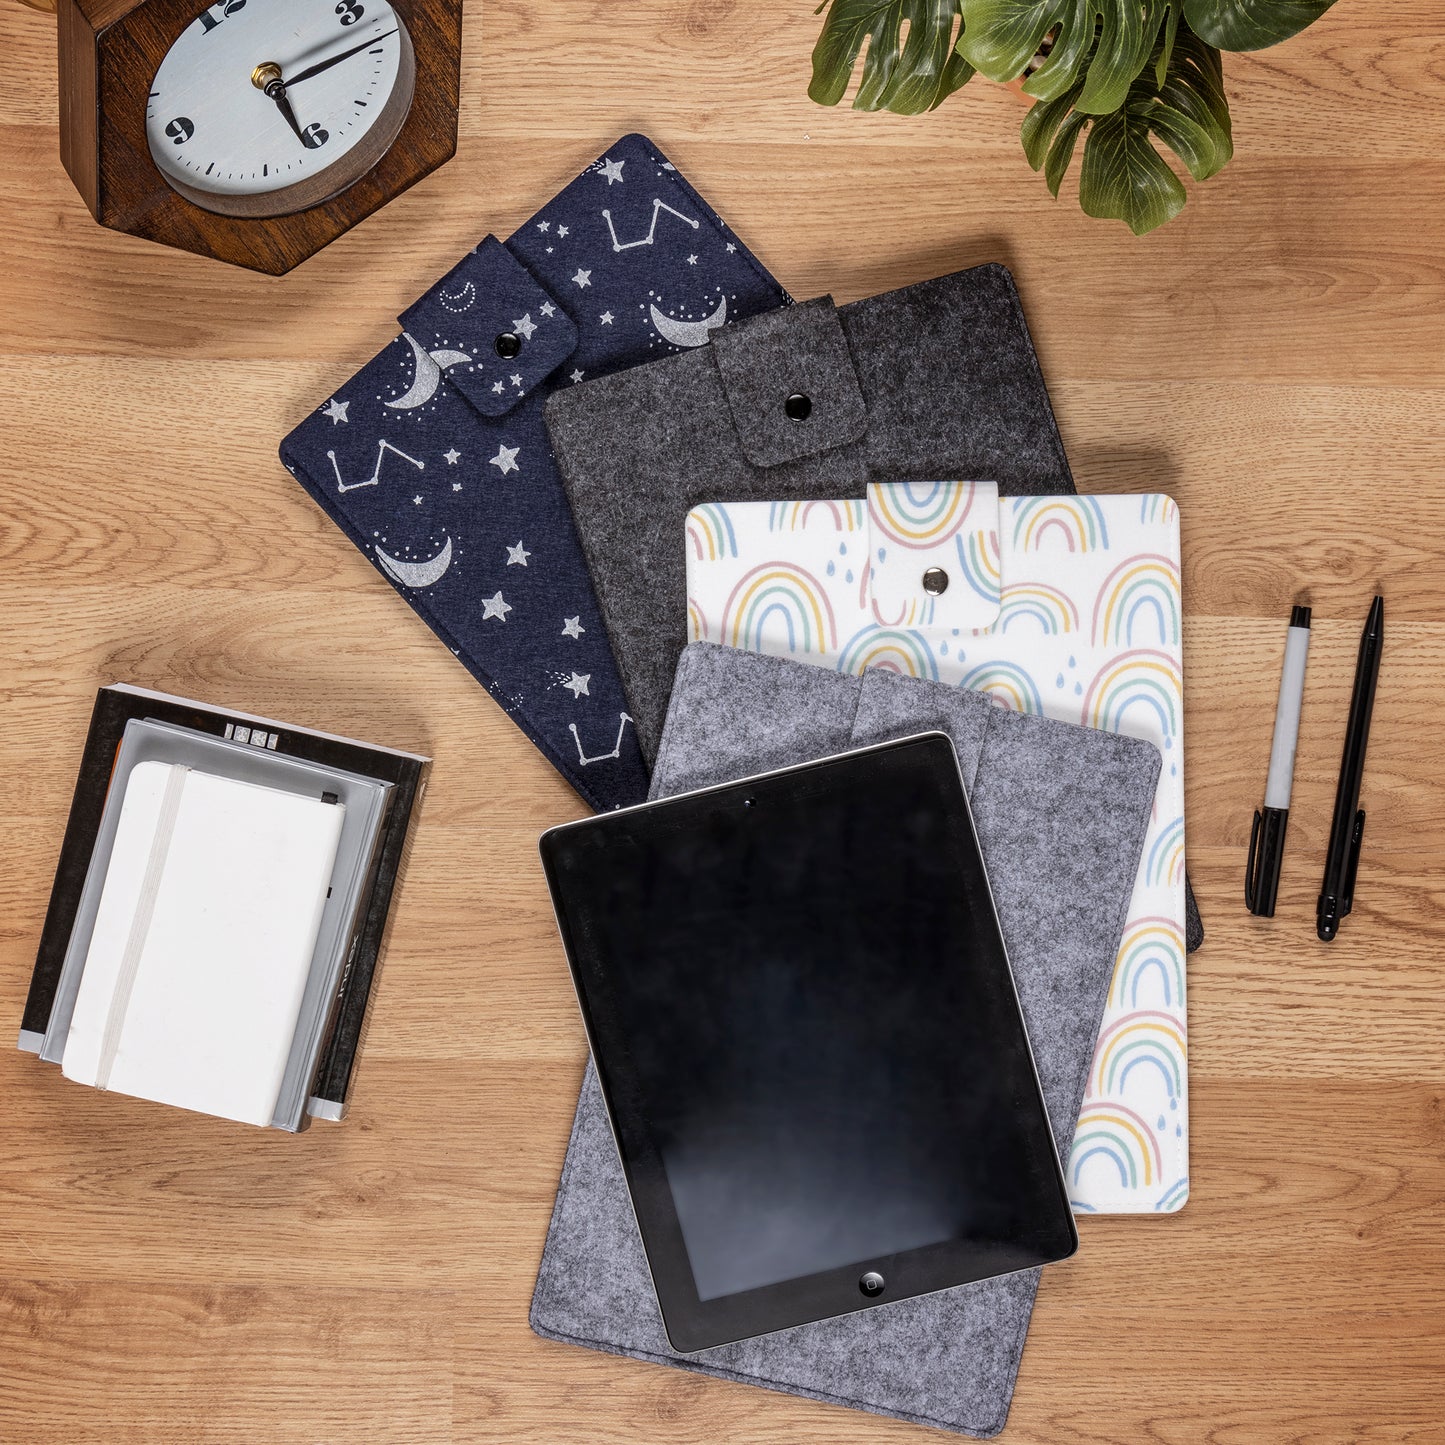  Felt Tablet Sleeve Carrying Case Collection; includes solid gray, rainbow print, and constellation print